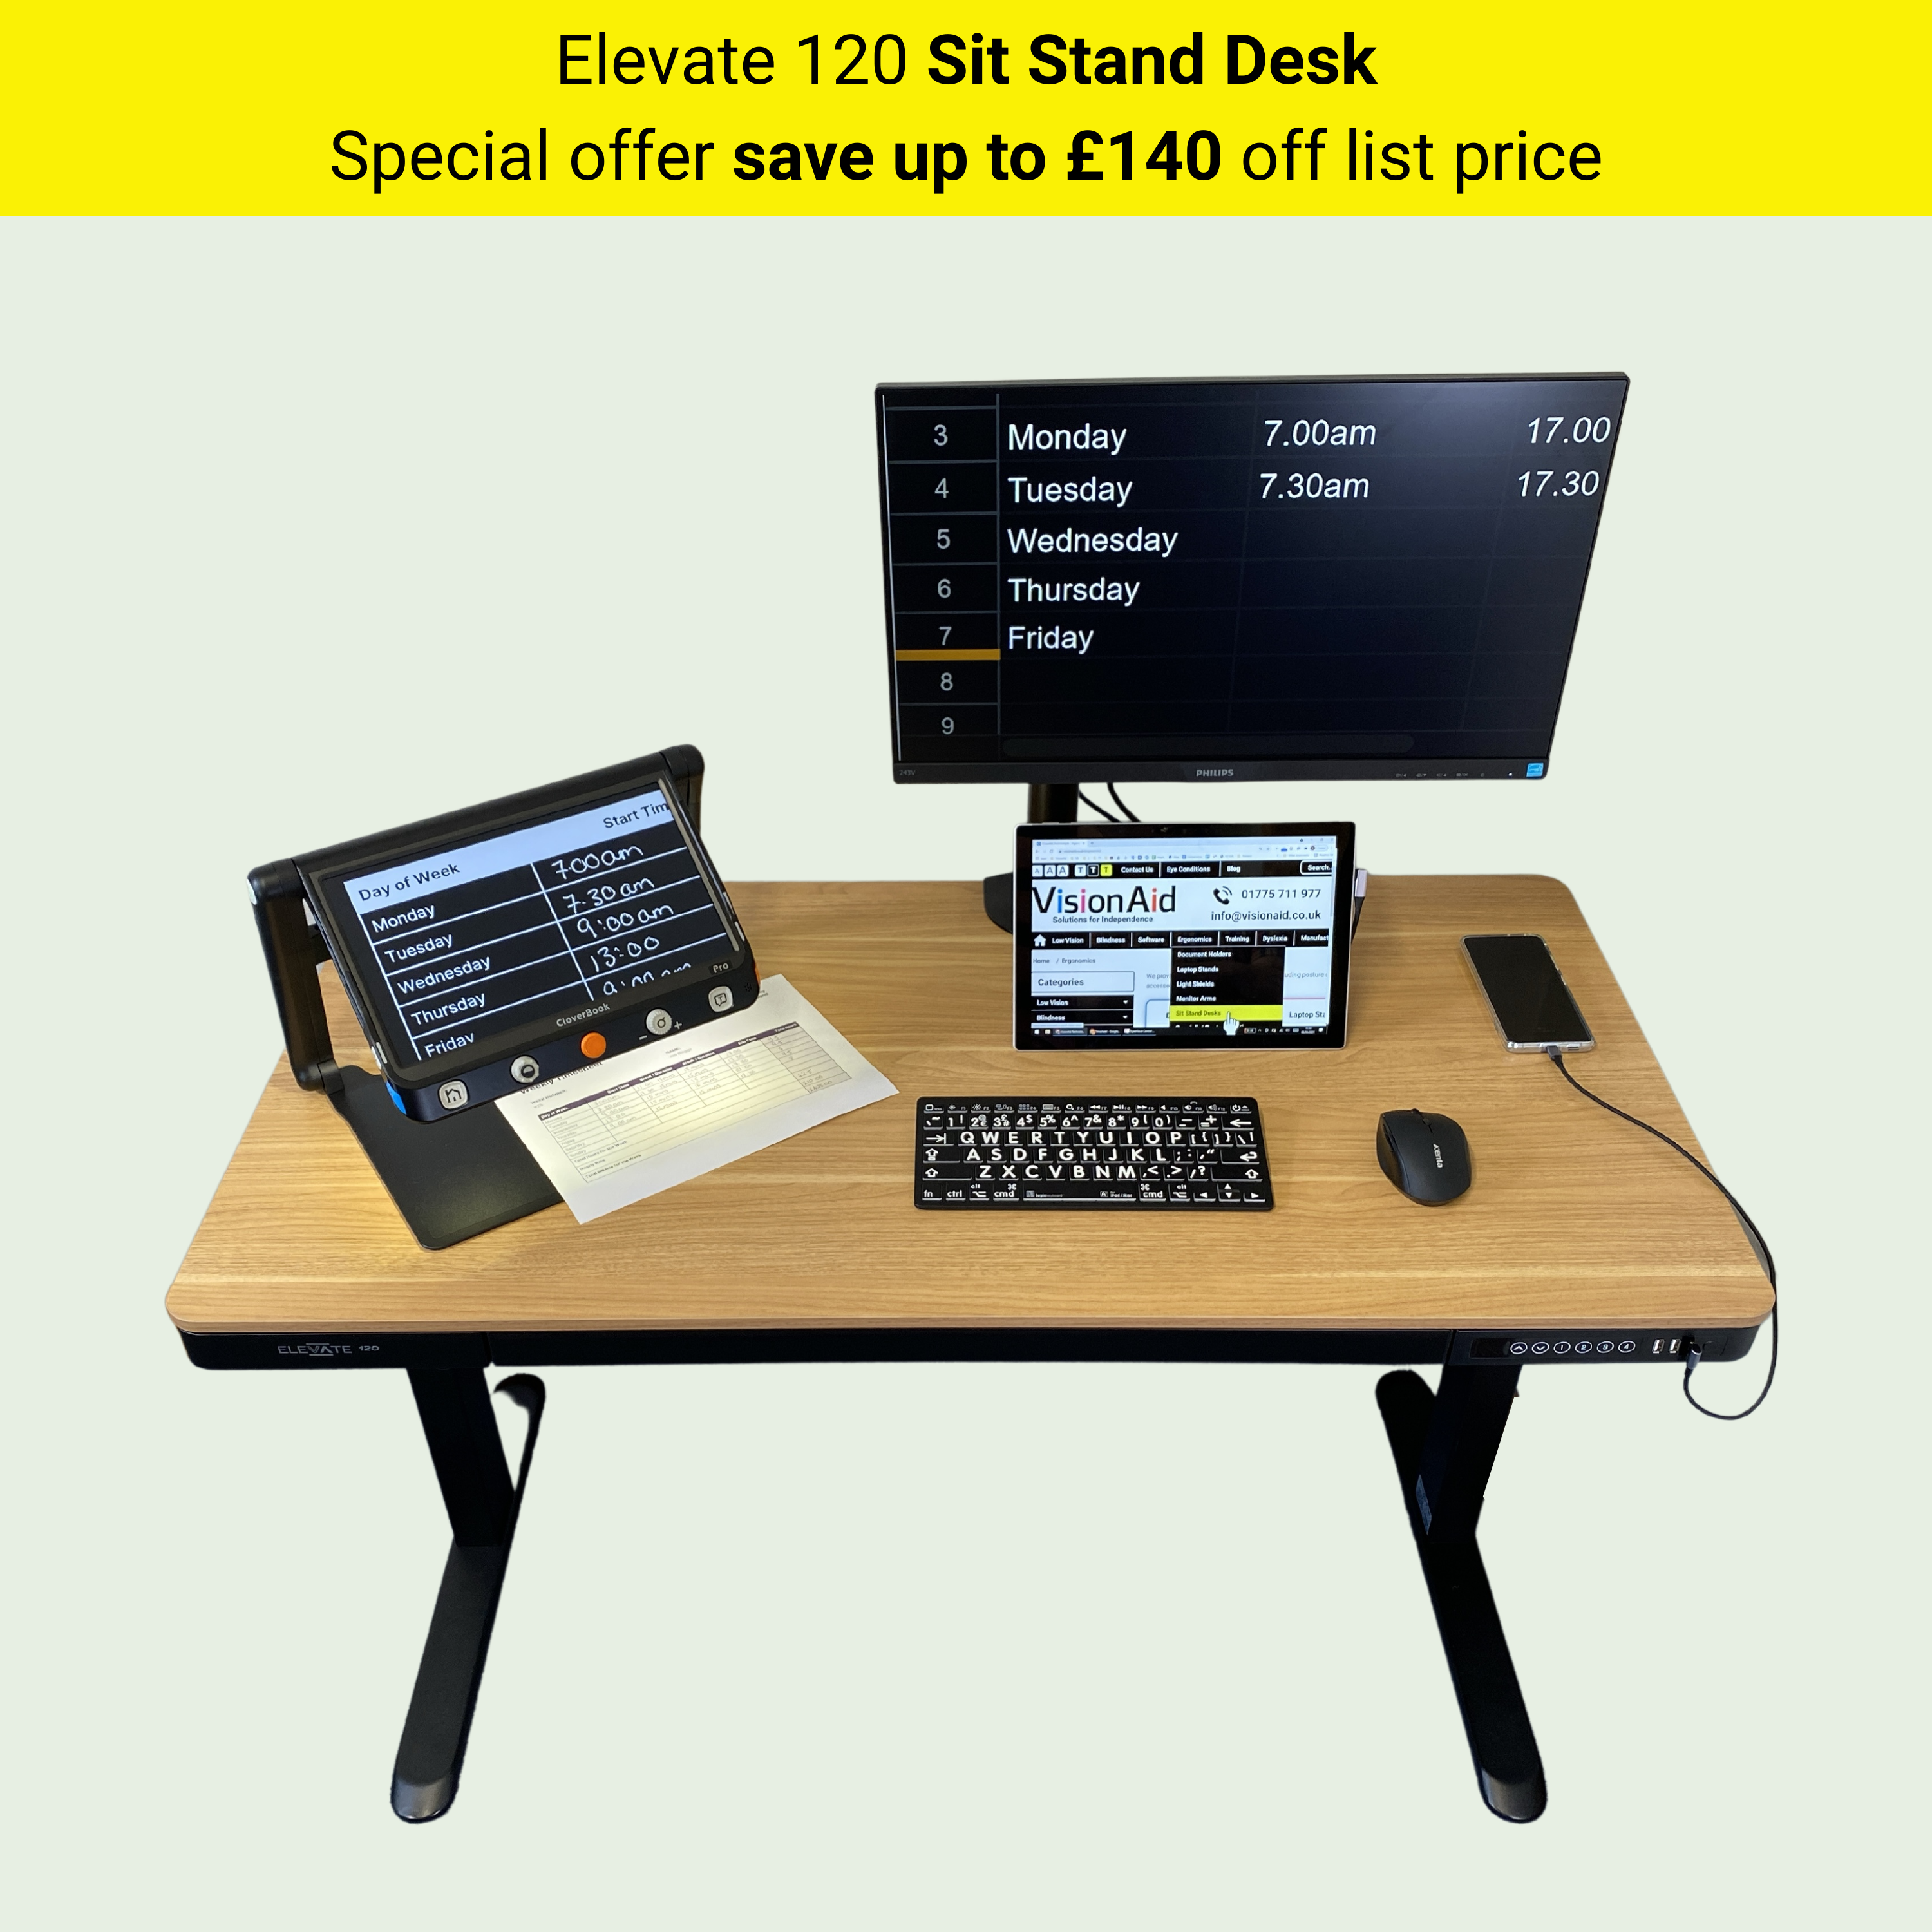 Elevate 120 sit stand desk. Special offer save up to £140 off list price